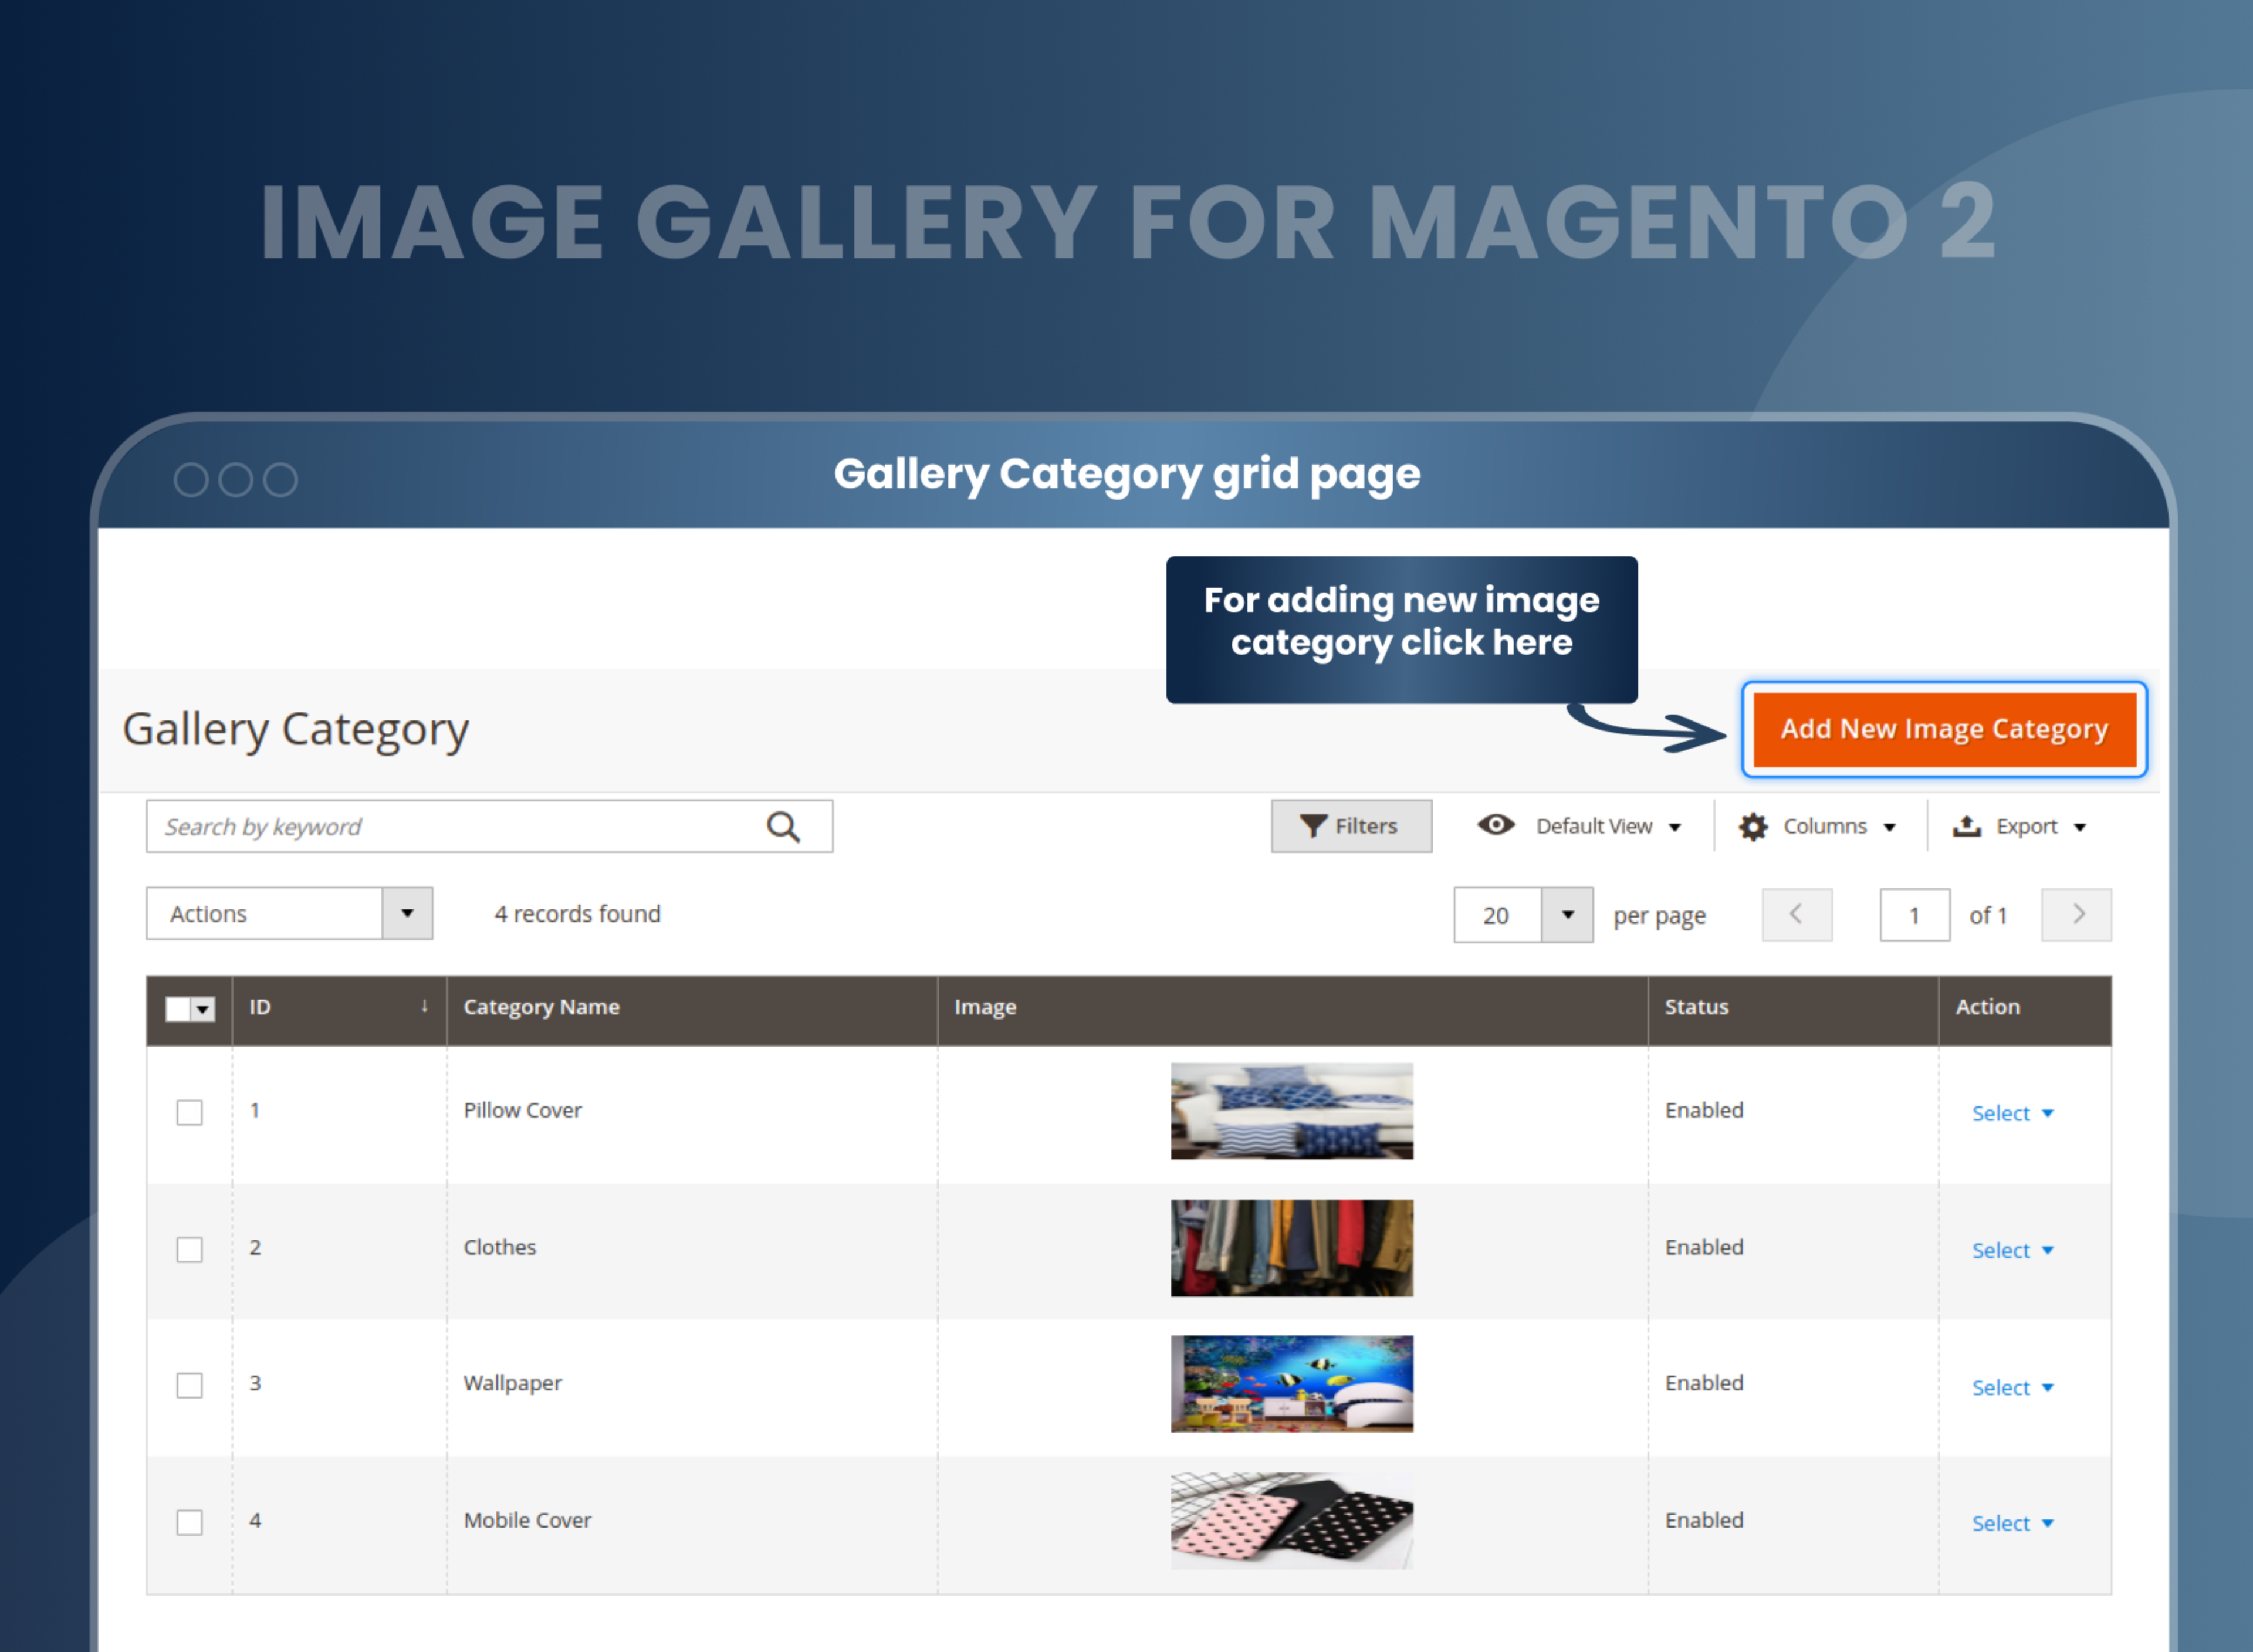 Gallery Category grid page